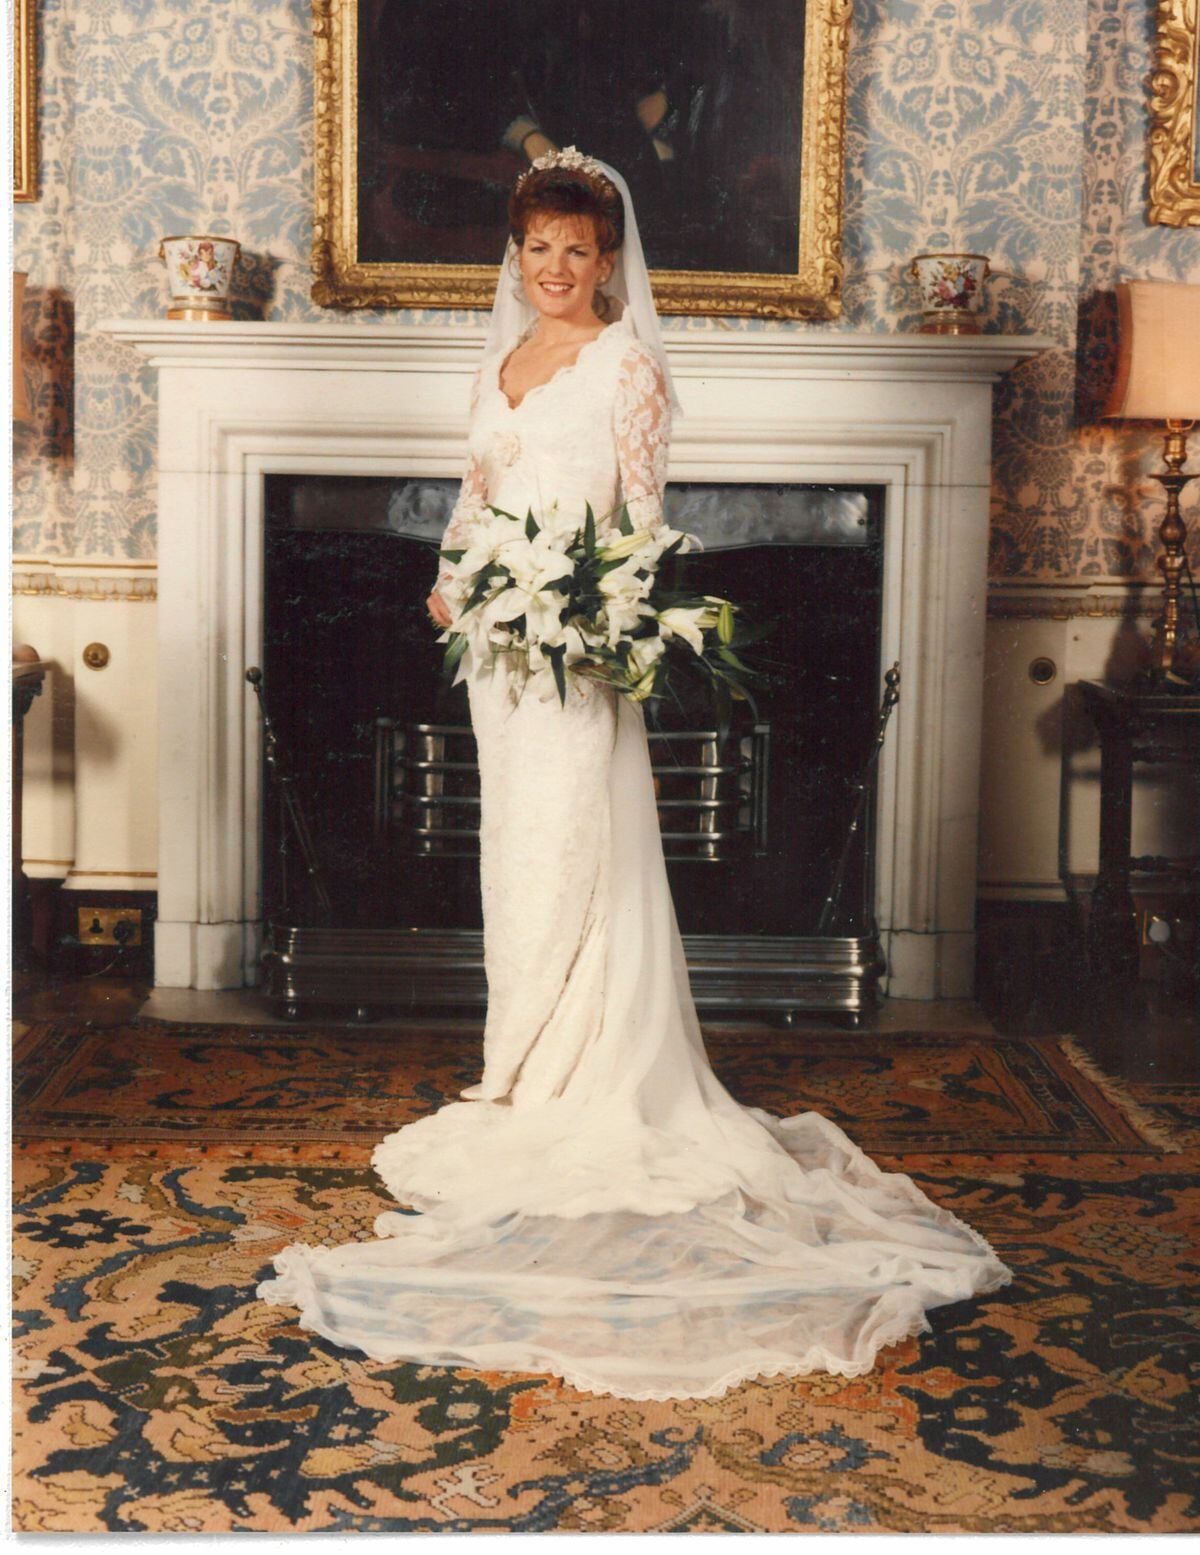 On her wedding day in 1992